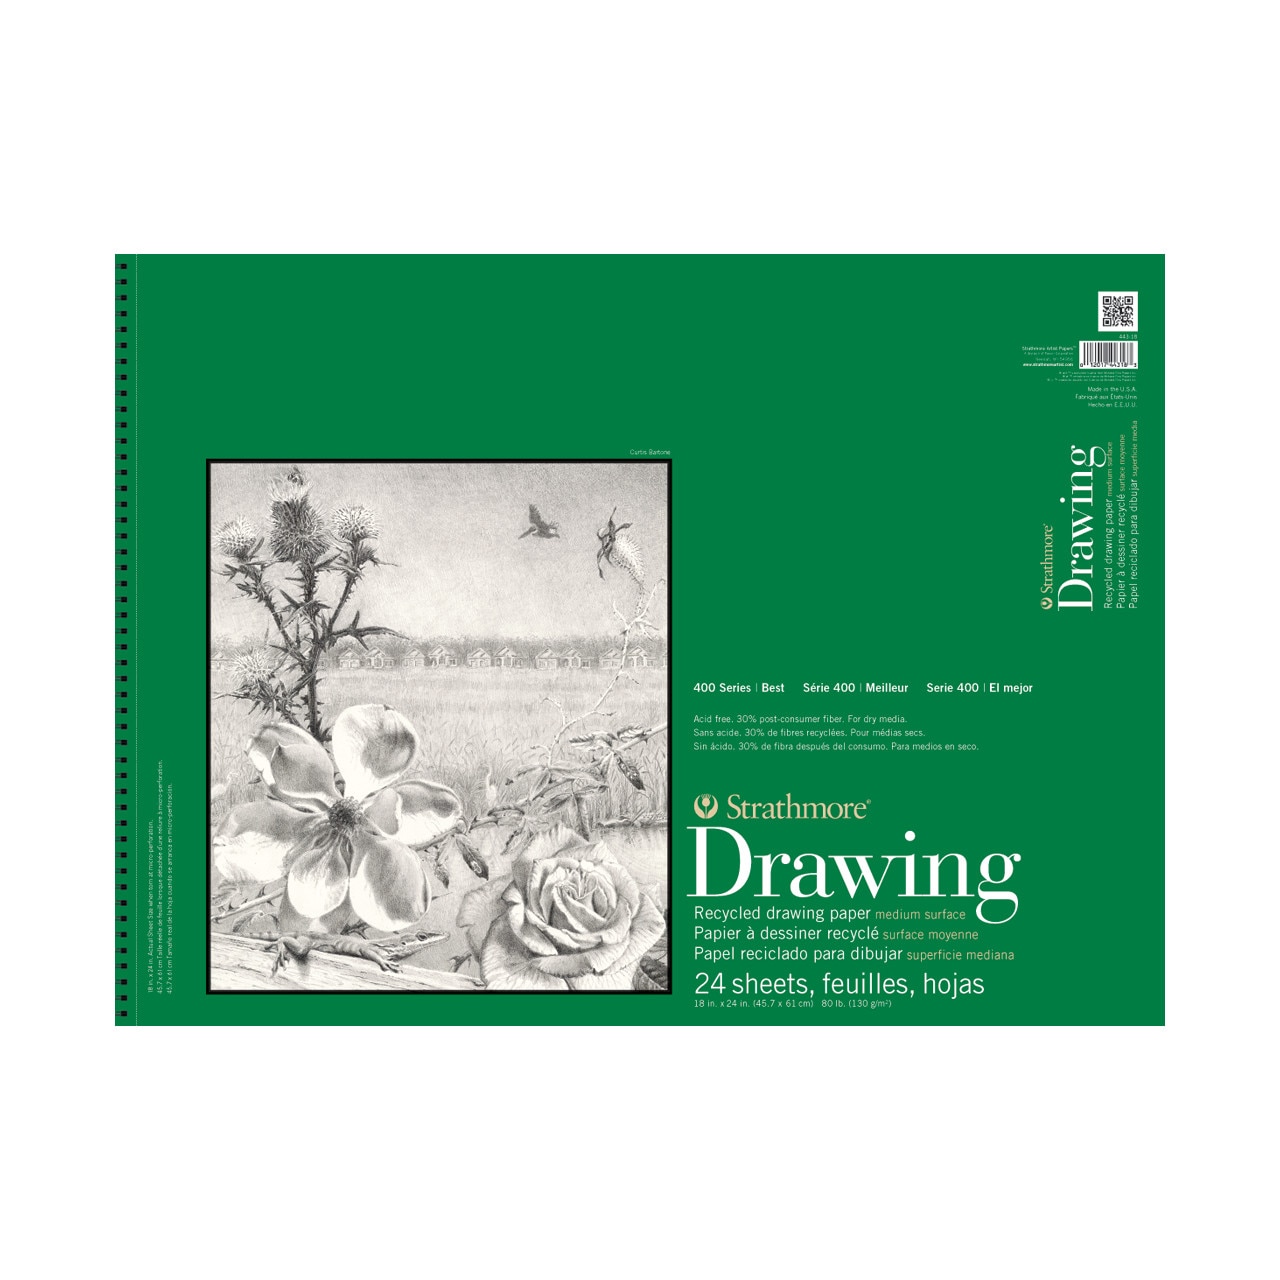 Strathmore Drawing Paper Pad, 400 Series, 18" x 24" , Recycled